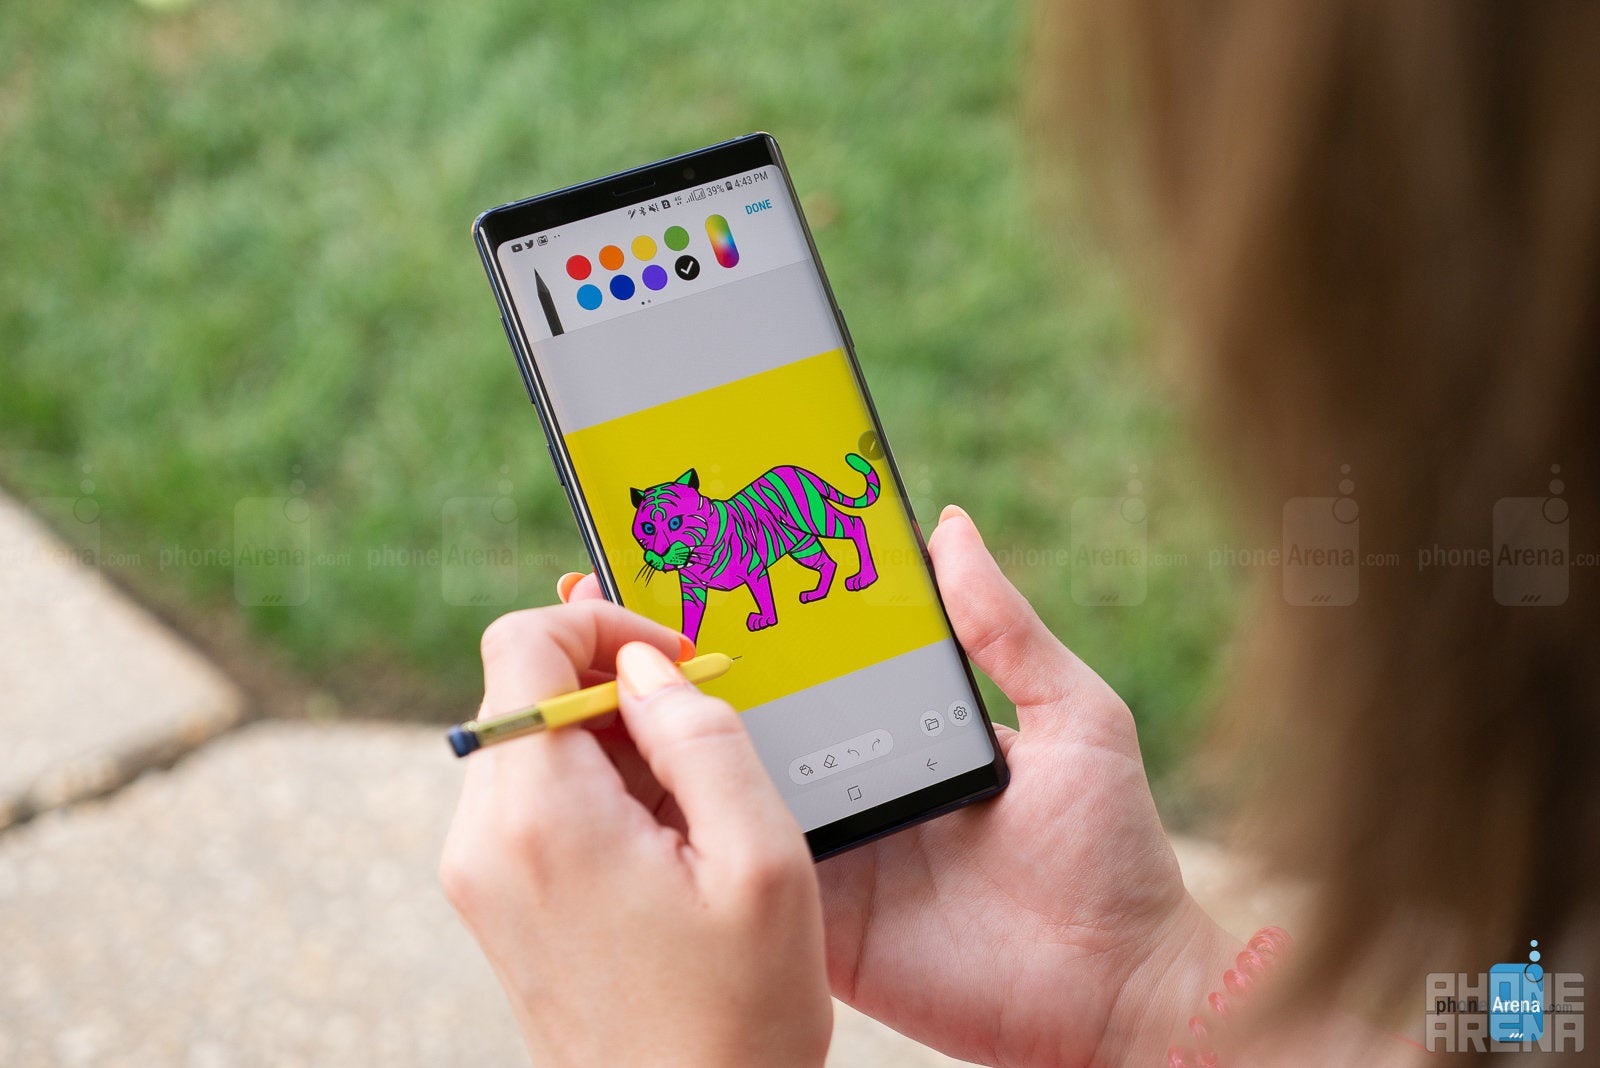 5 reasons you might prefer the Galaxy Note 9 over the new Galaxy S10+